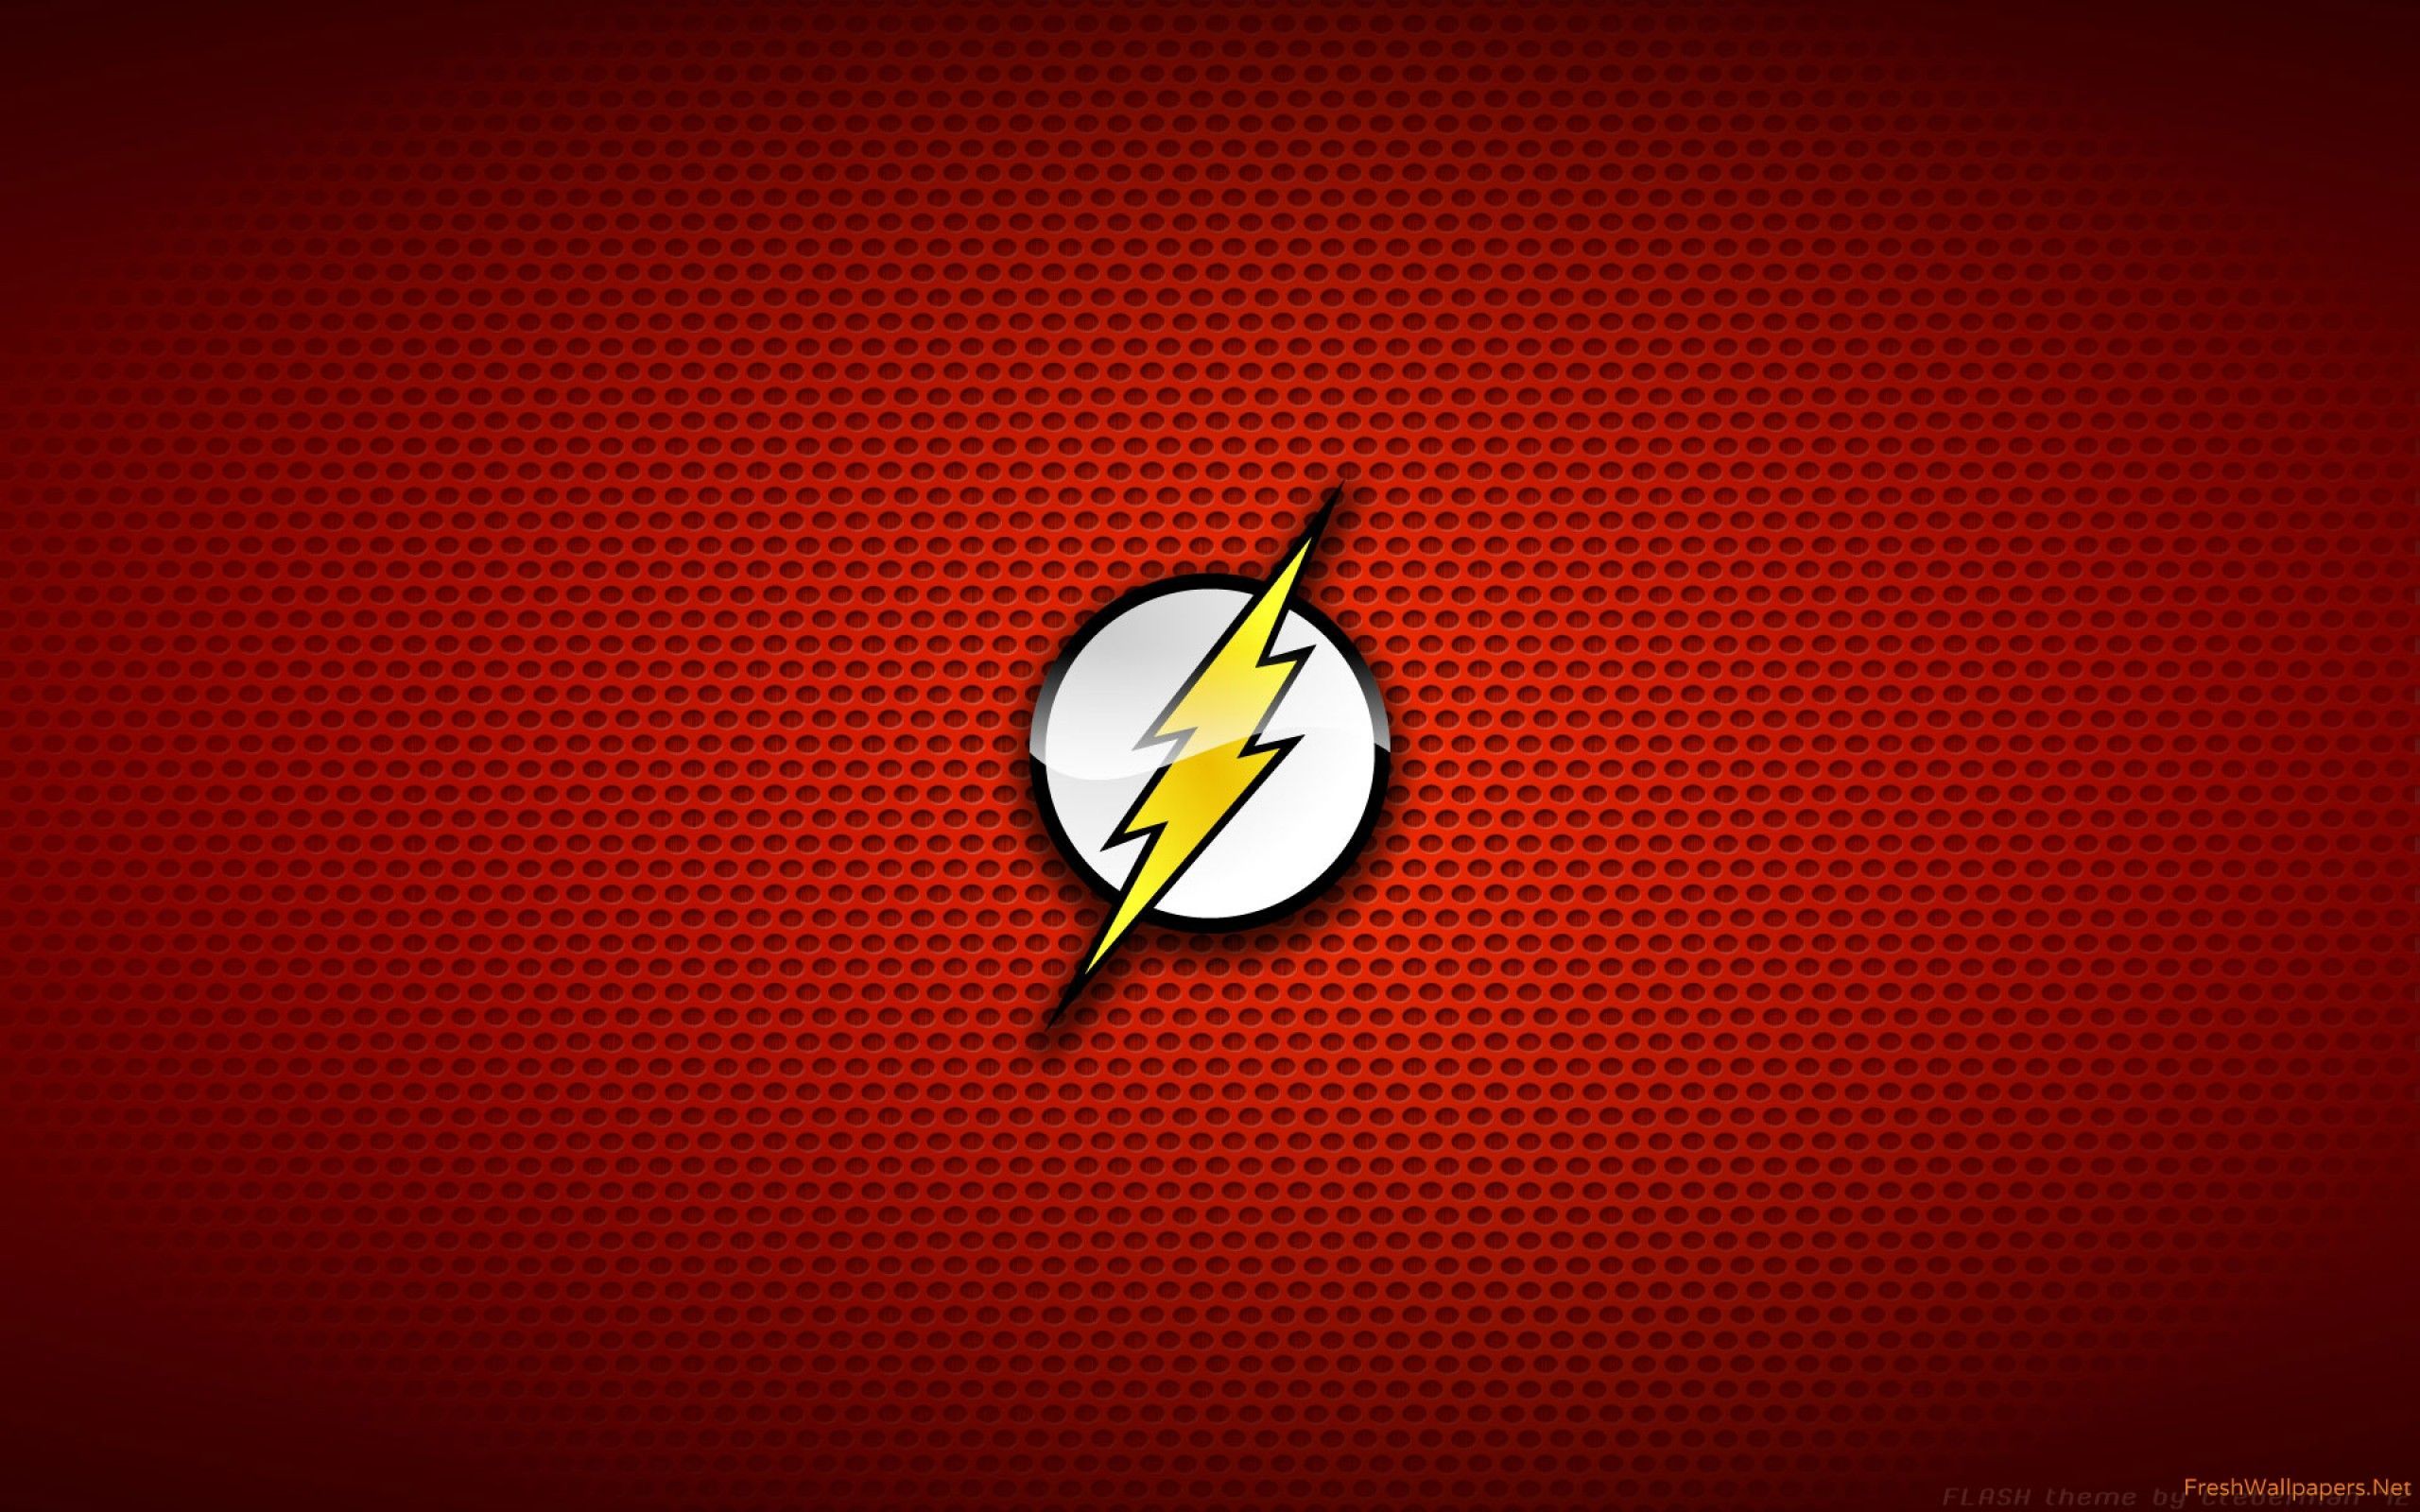 The Flash 2014 HD Wallpaper wallpapers Freshwallpapers